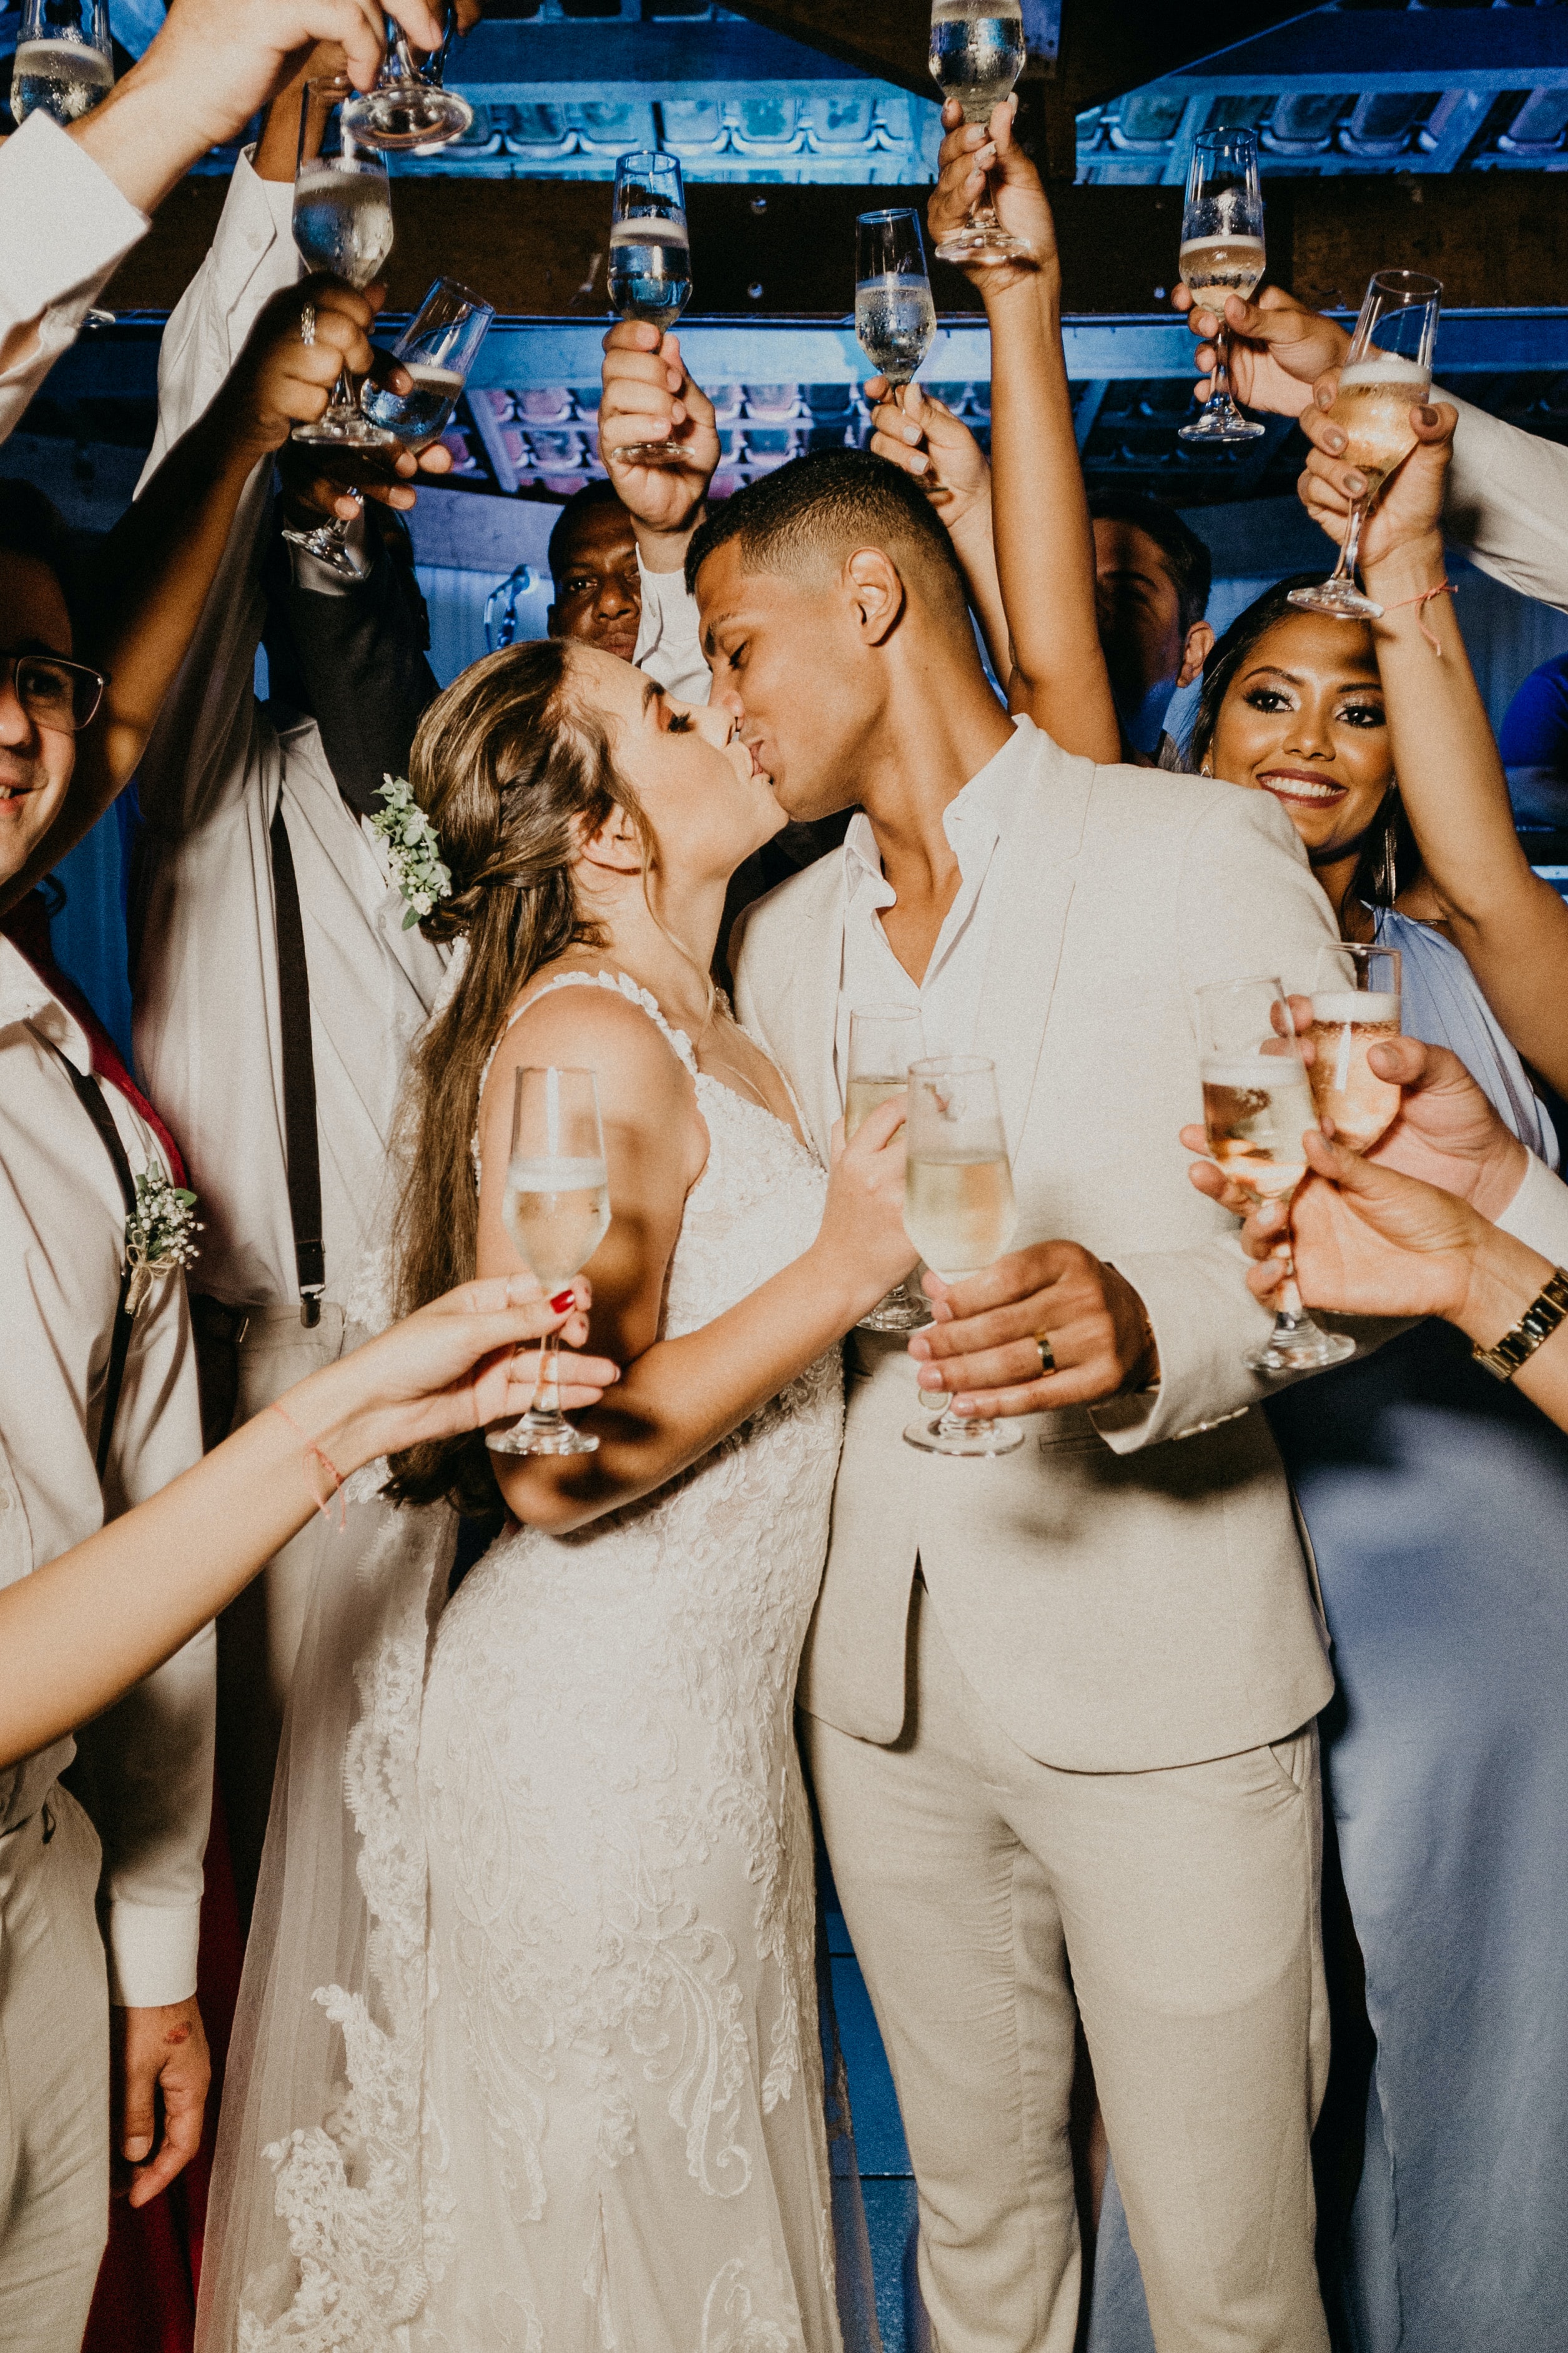 How to Pull Off a Mixed-Gender Bridal Party Like a Champ